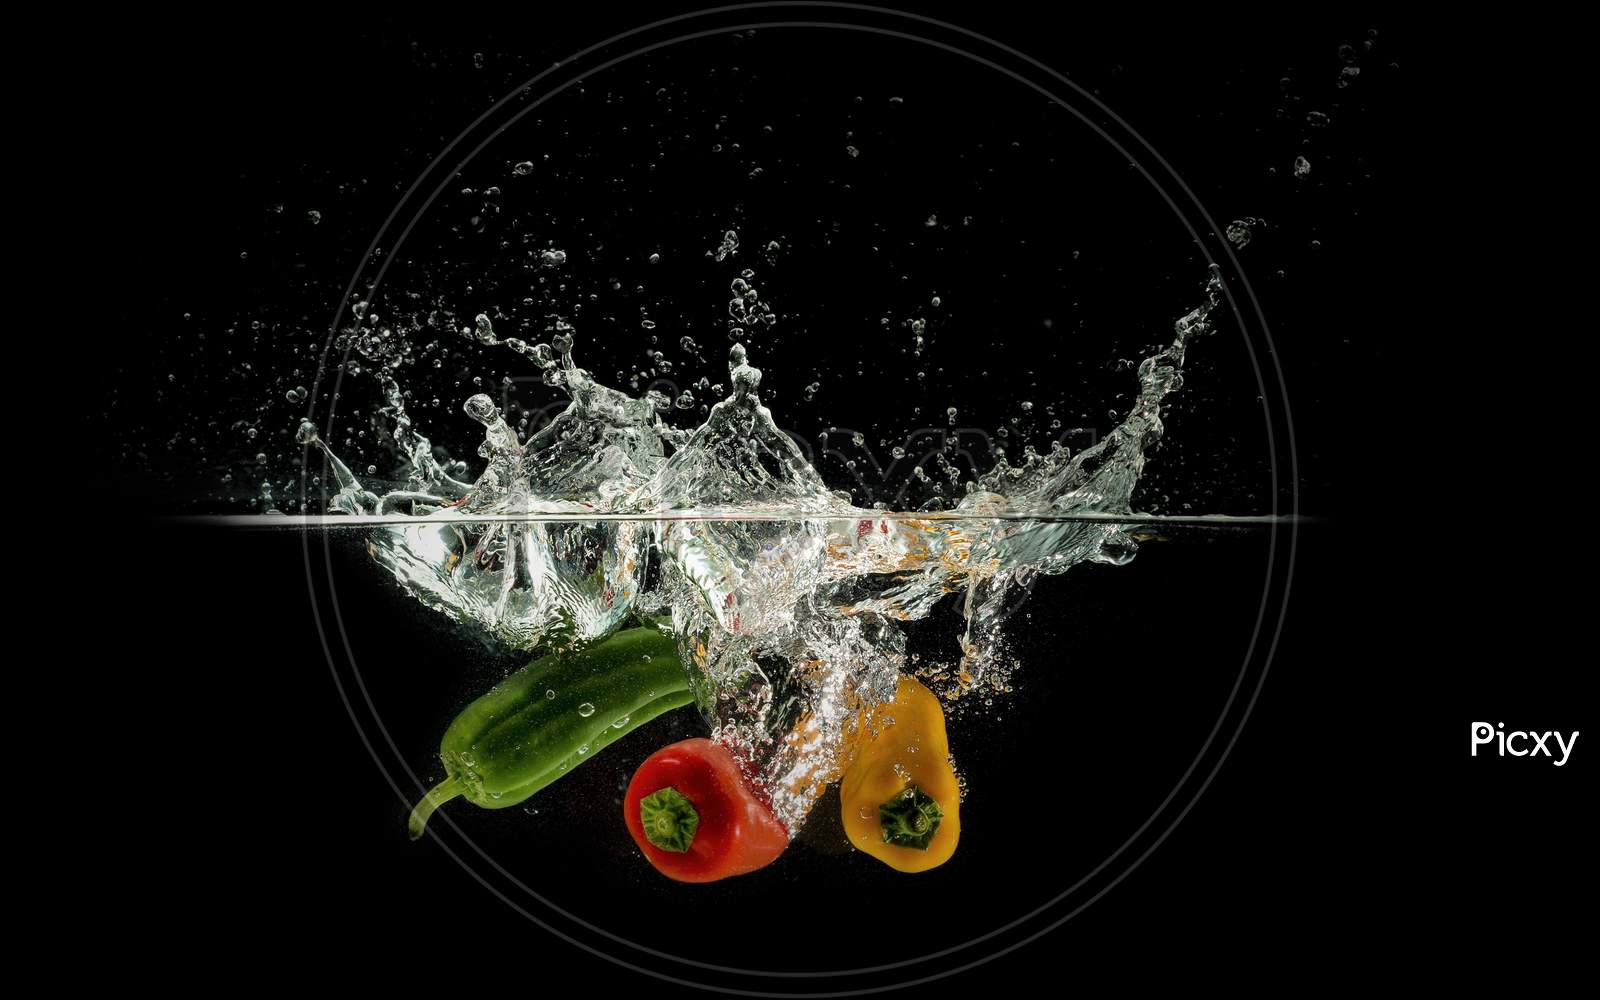 Yellow, Green & Red Bell Pepper In Water Black Background.